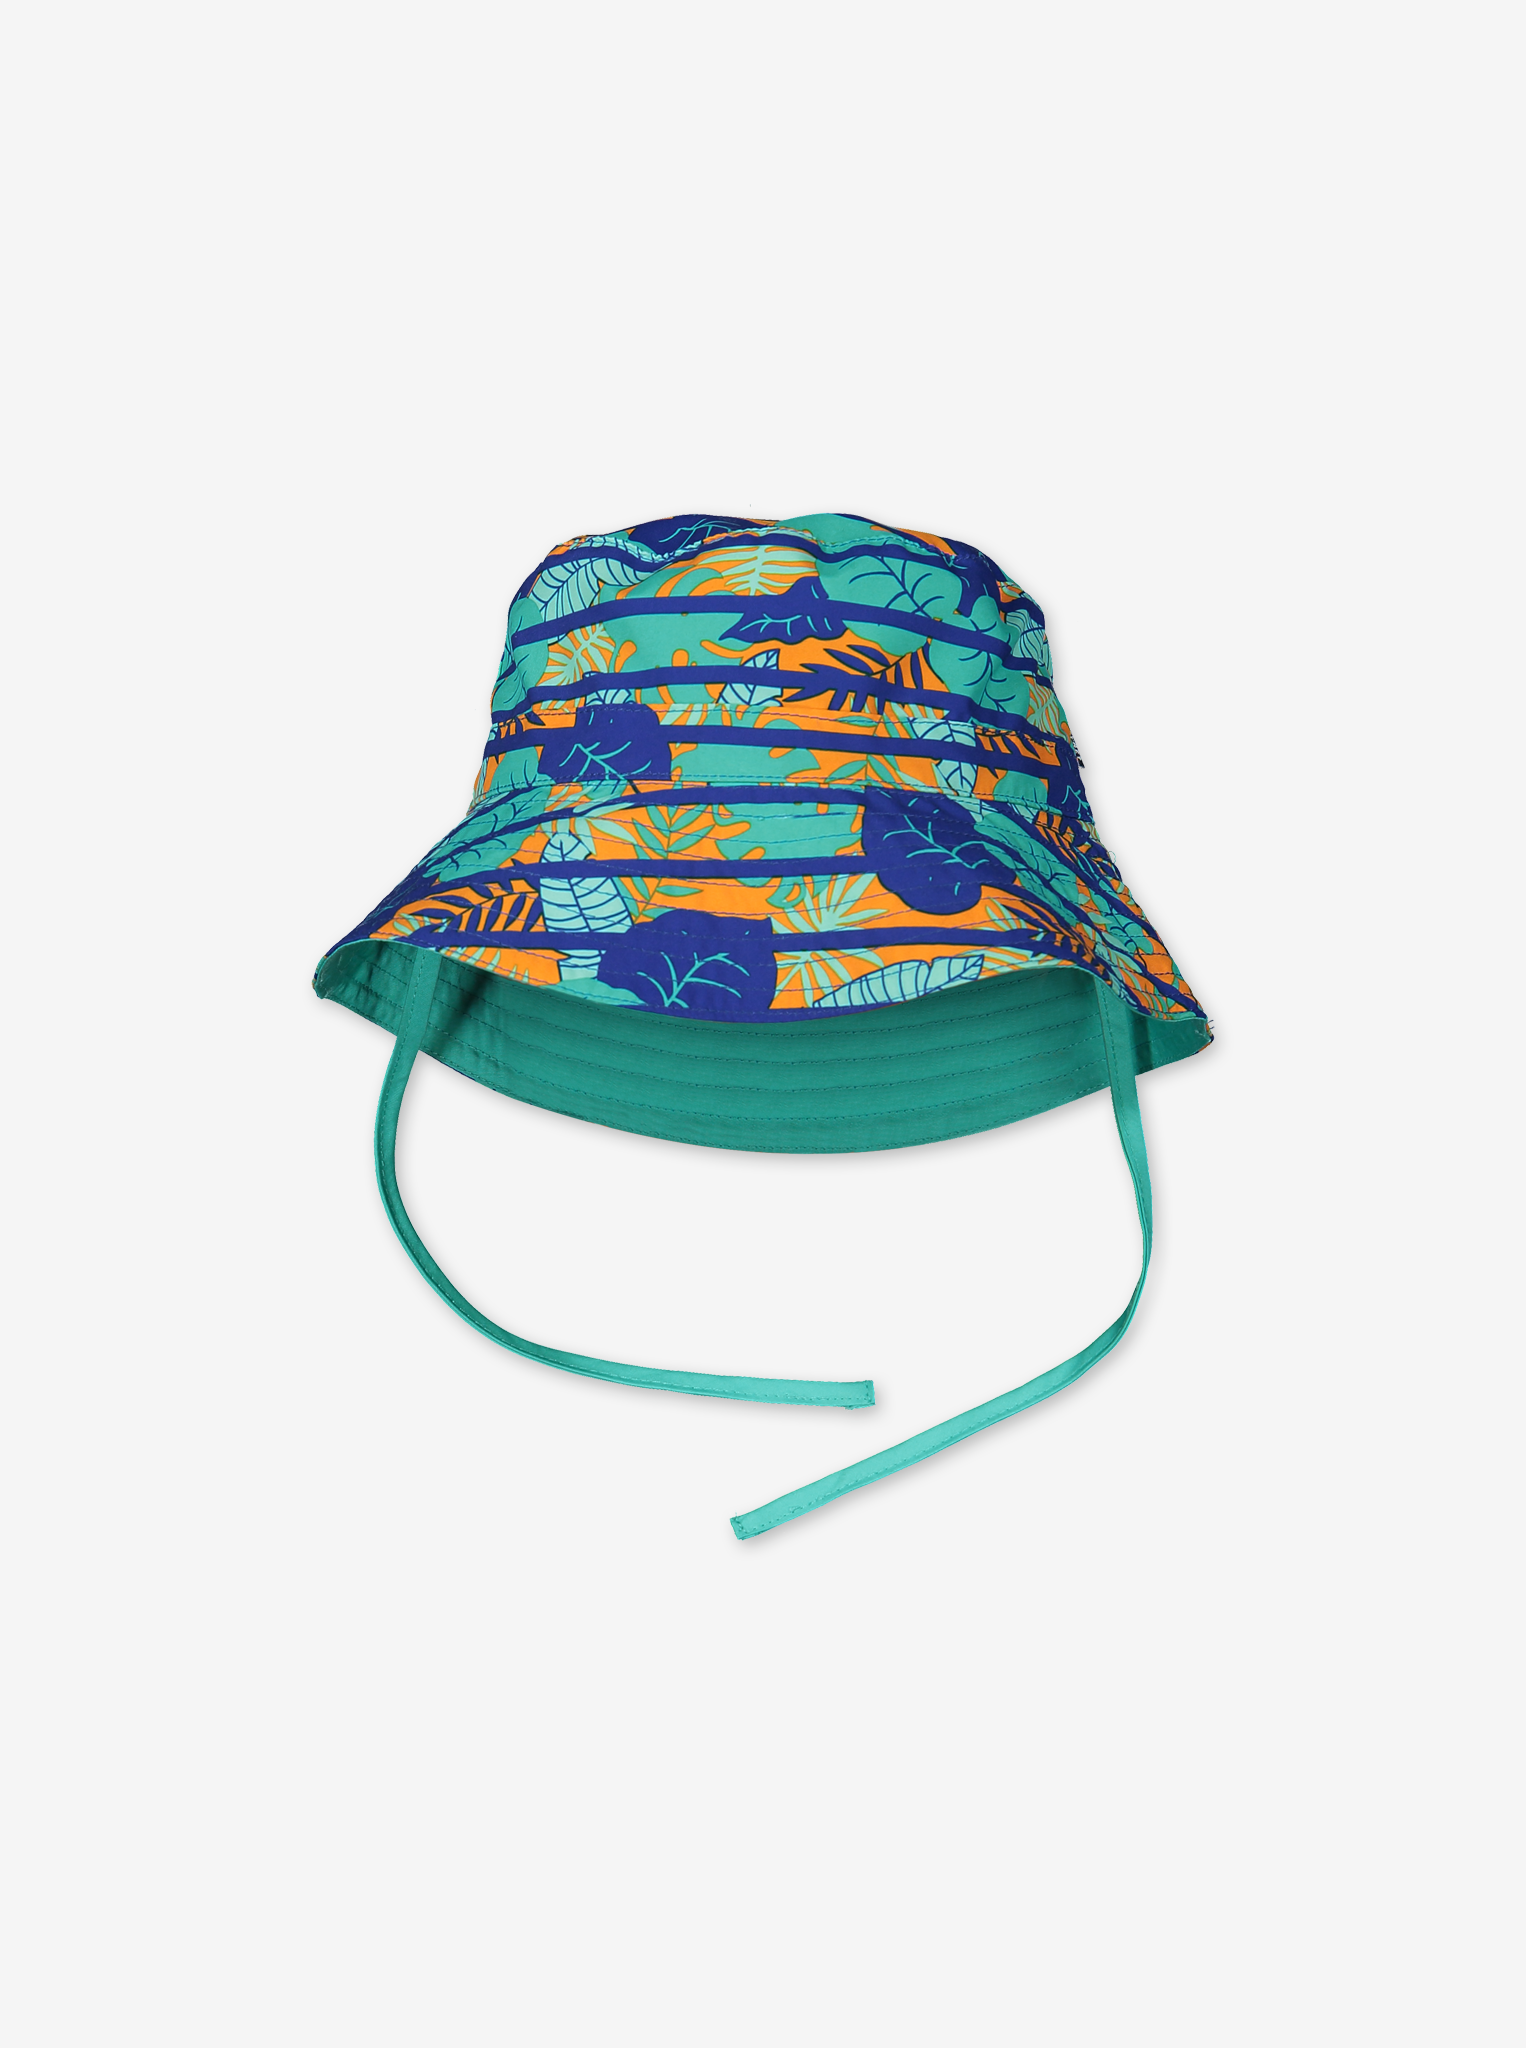 Reversible sun hat with UV protection-Unisex-9m-9y-Blue